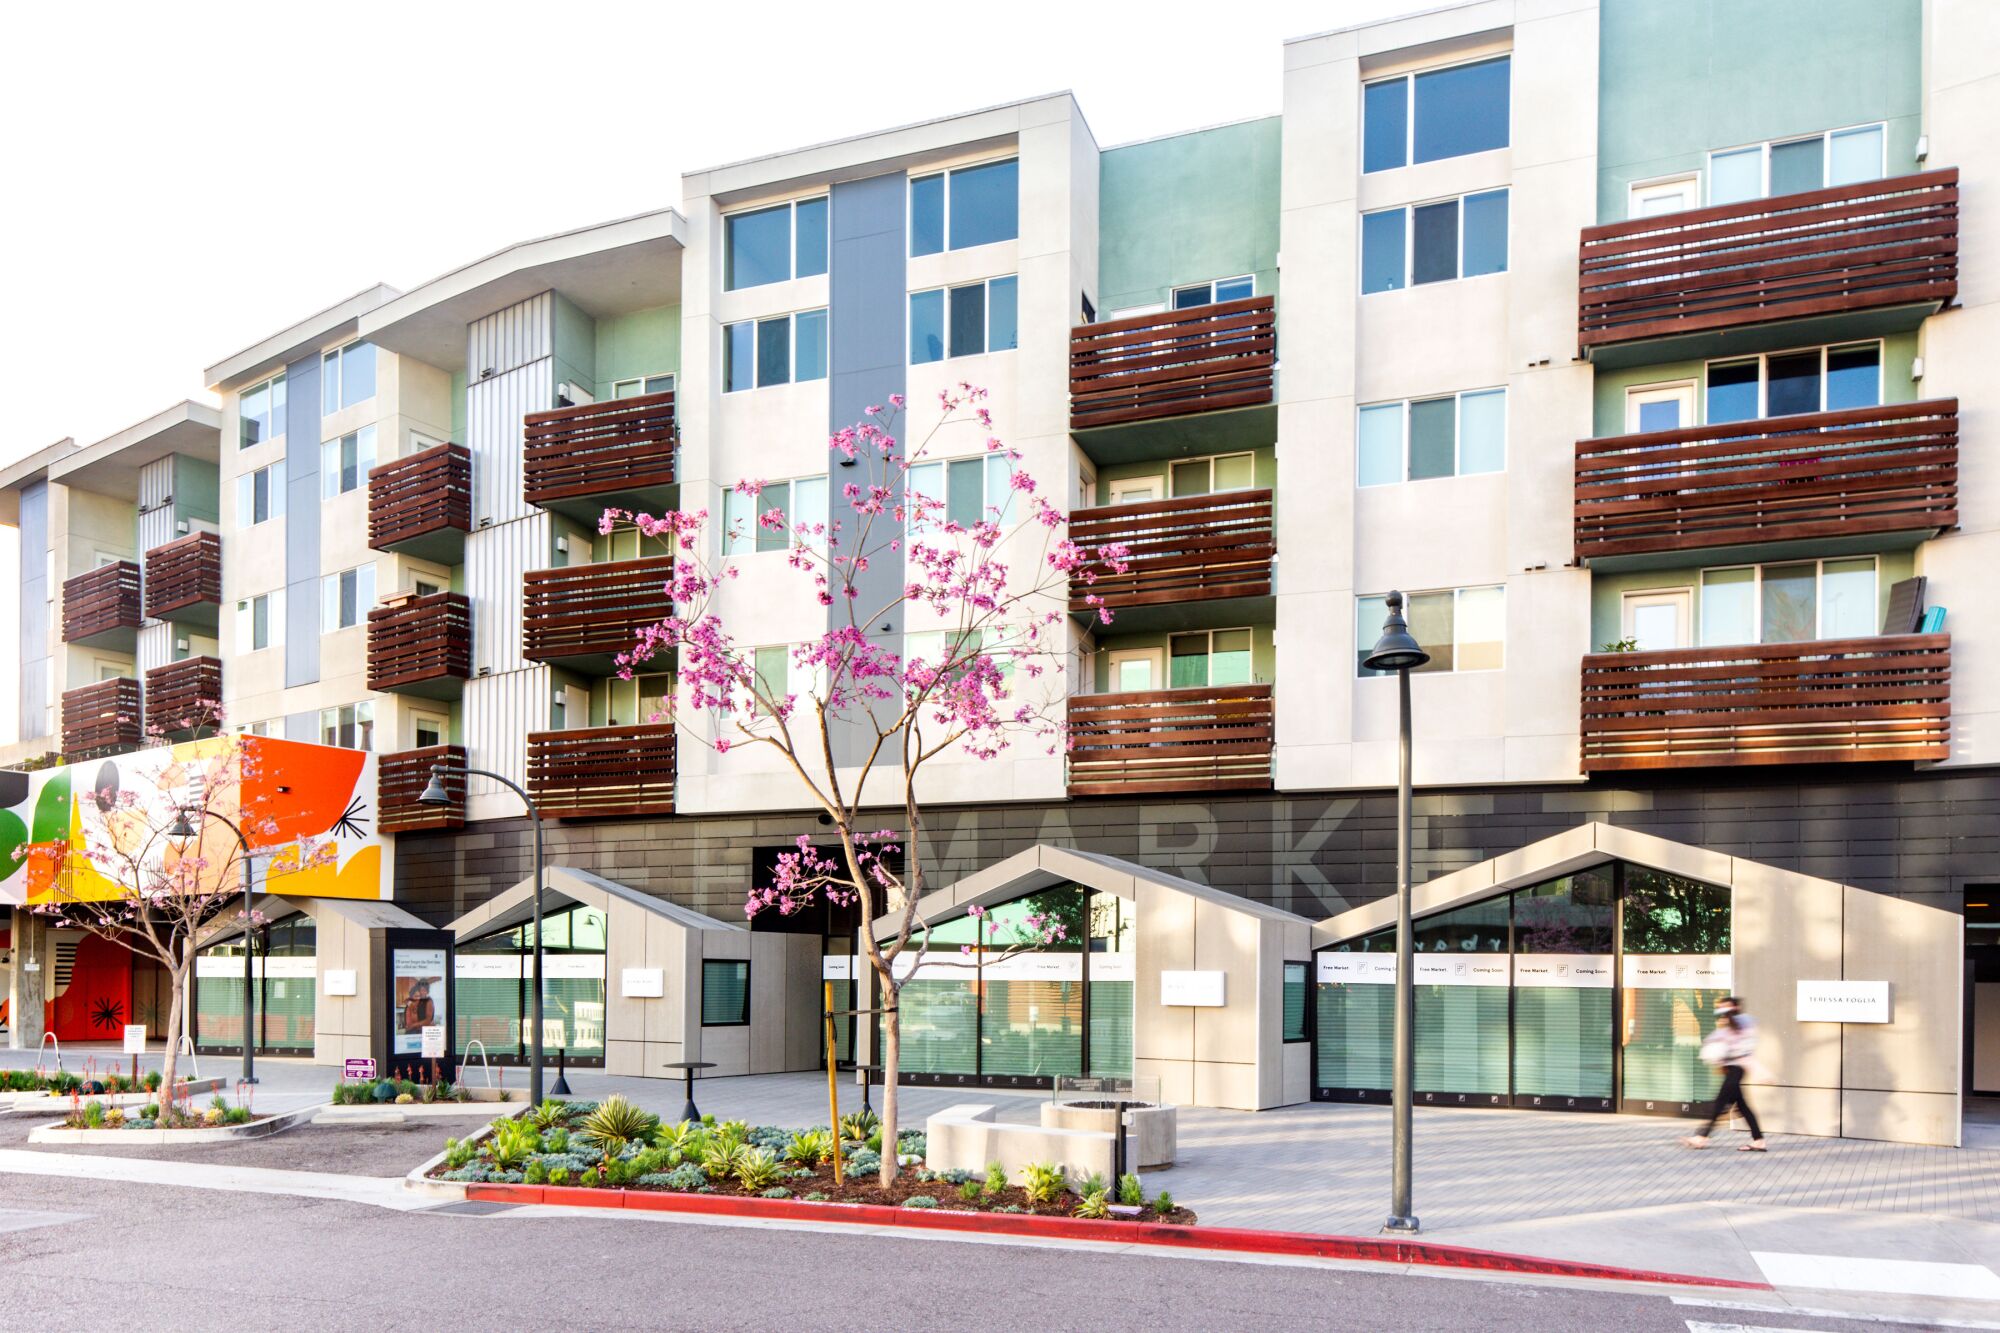 View of the exterior of Free Market Playa Vista.